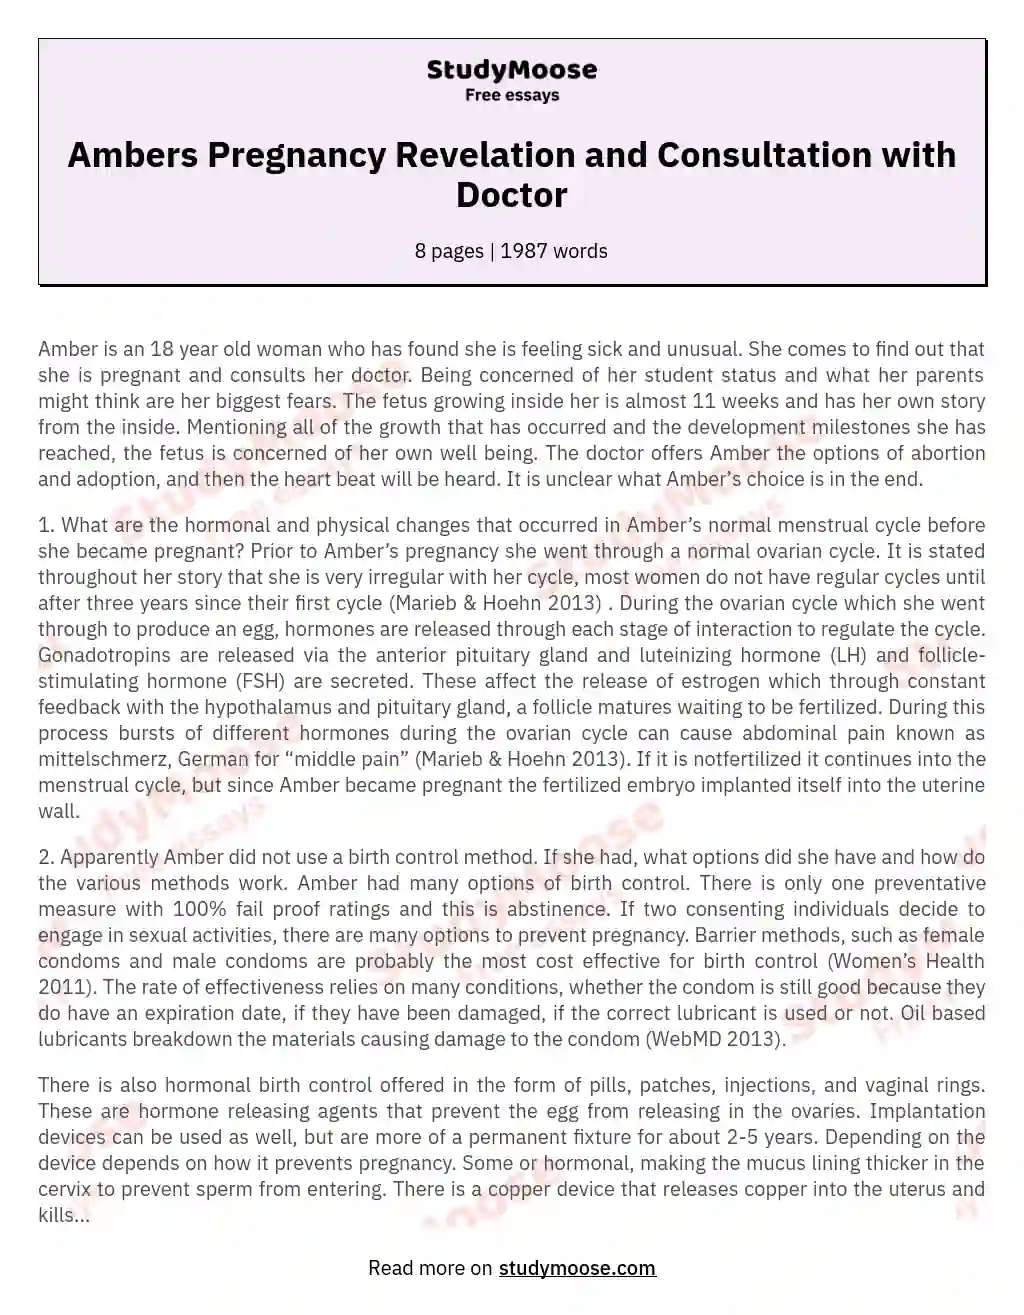 Ambers Pregnancy Revelation and Consultation with Doctor essay